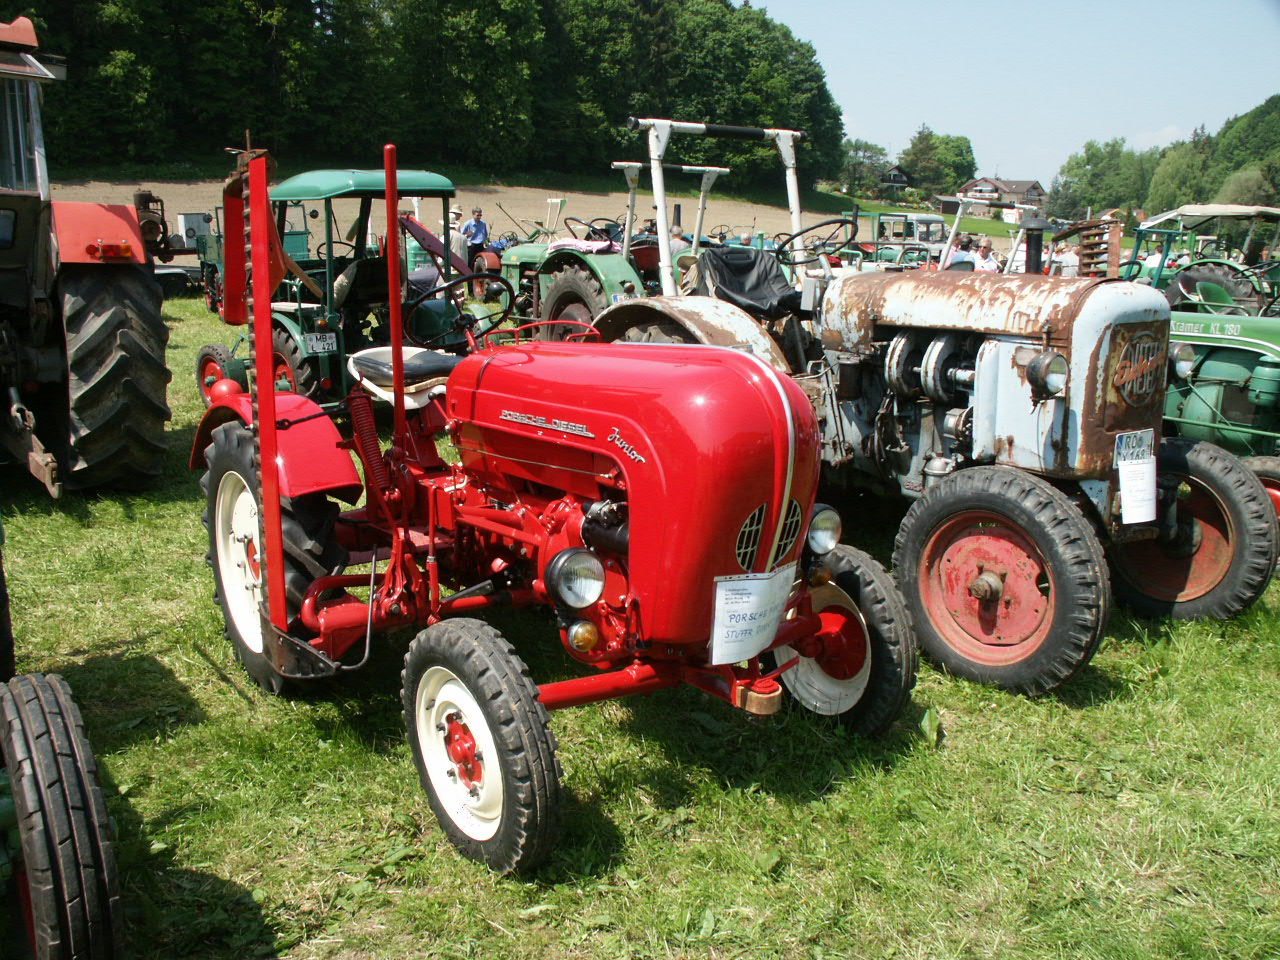 Category:Red tractors | Tractor & Construction Plant Wiki | FANDOM